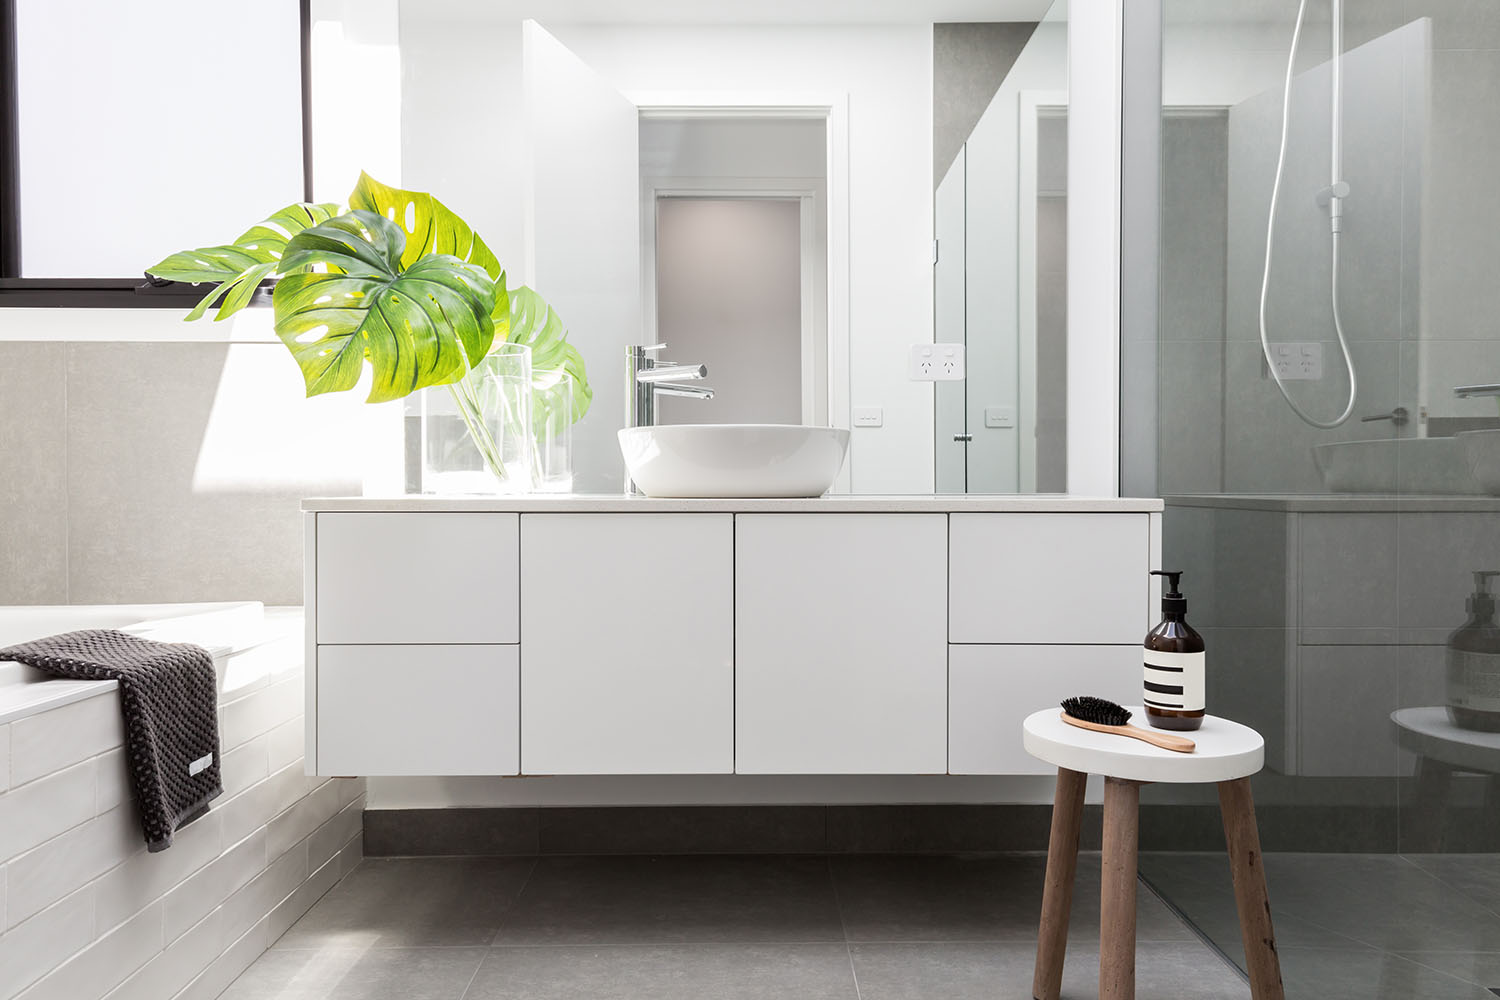 Bathroom Renovations How Much, How Much Does A Bathroom Renovation Cost Australia